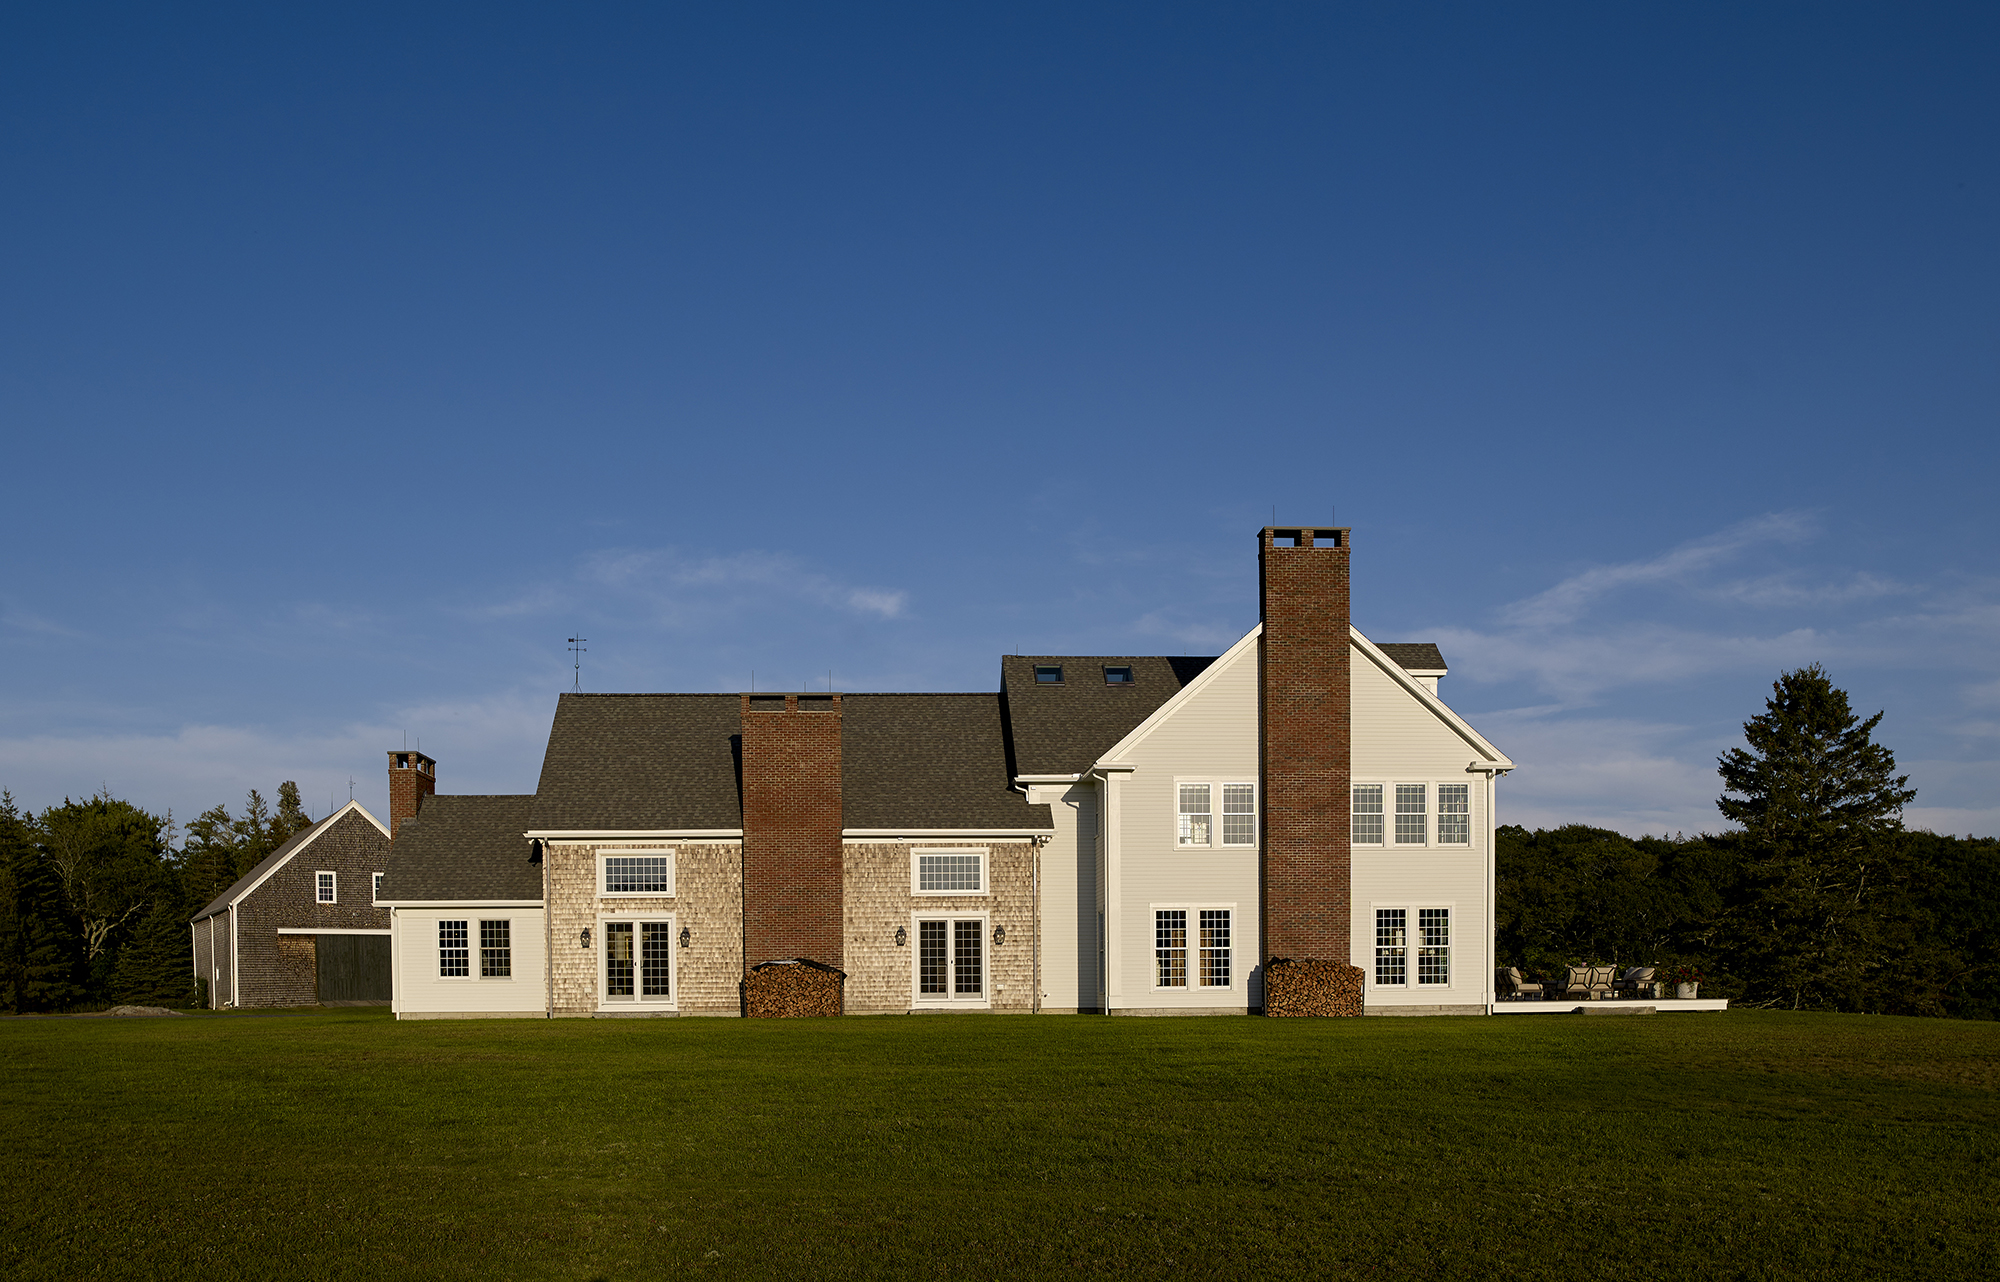 View of the home from the field showing three large chimneys